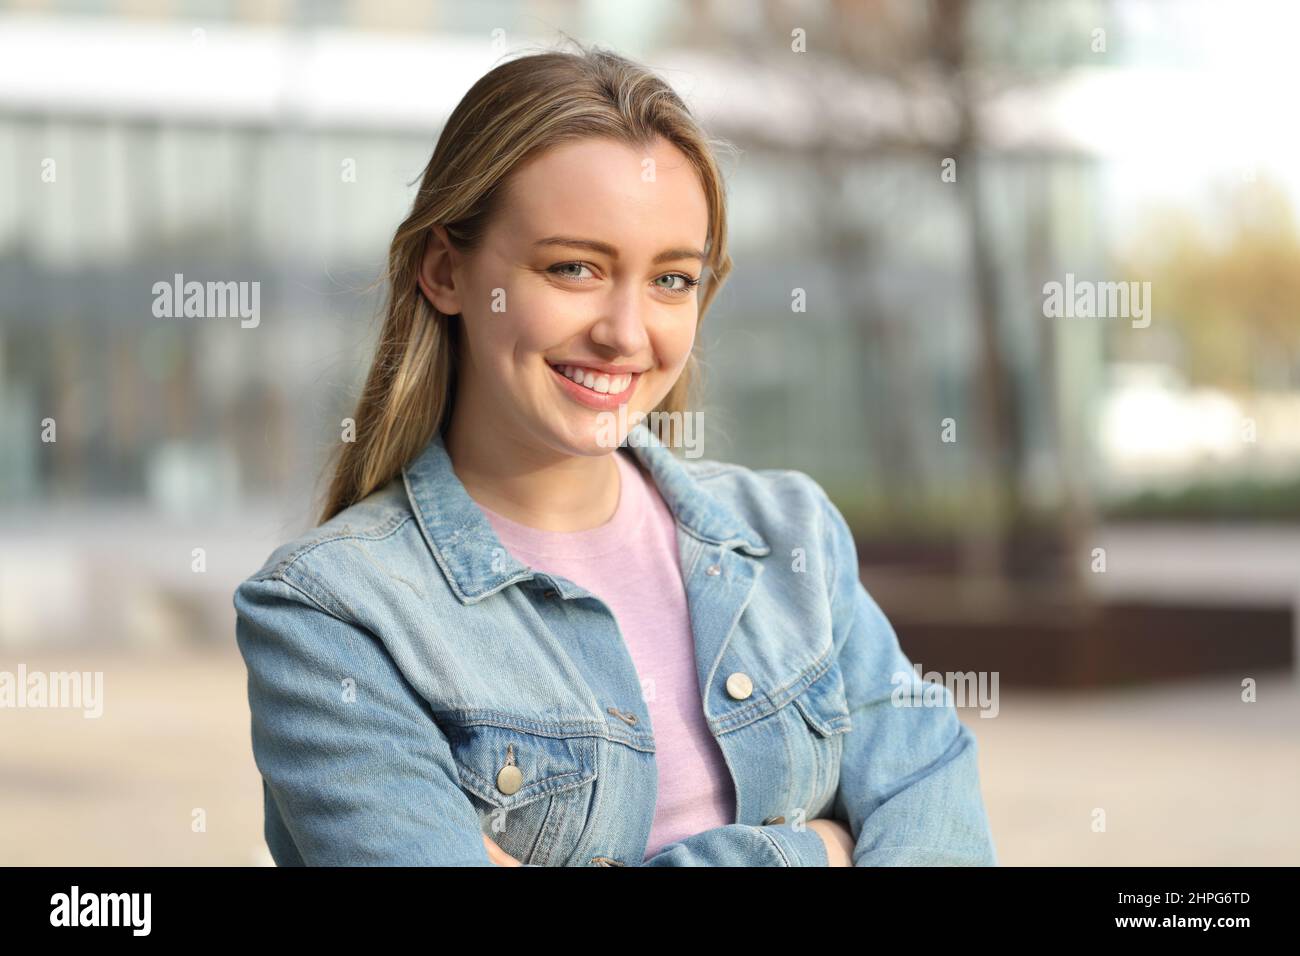 Happy casual teen posing looking at camera standing in the street Stock Photo